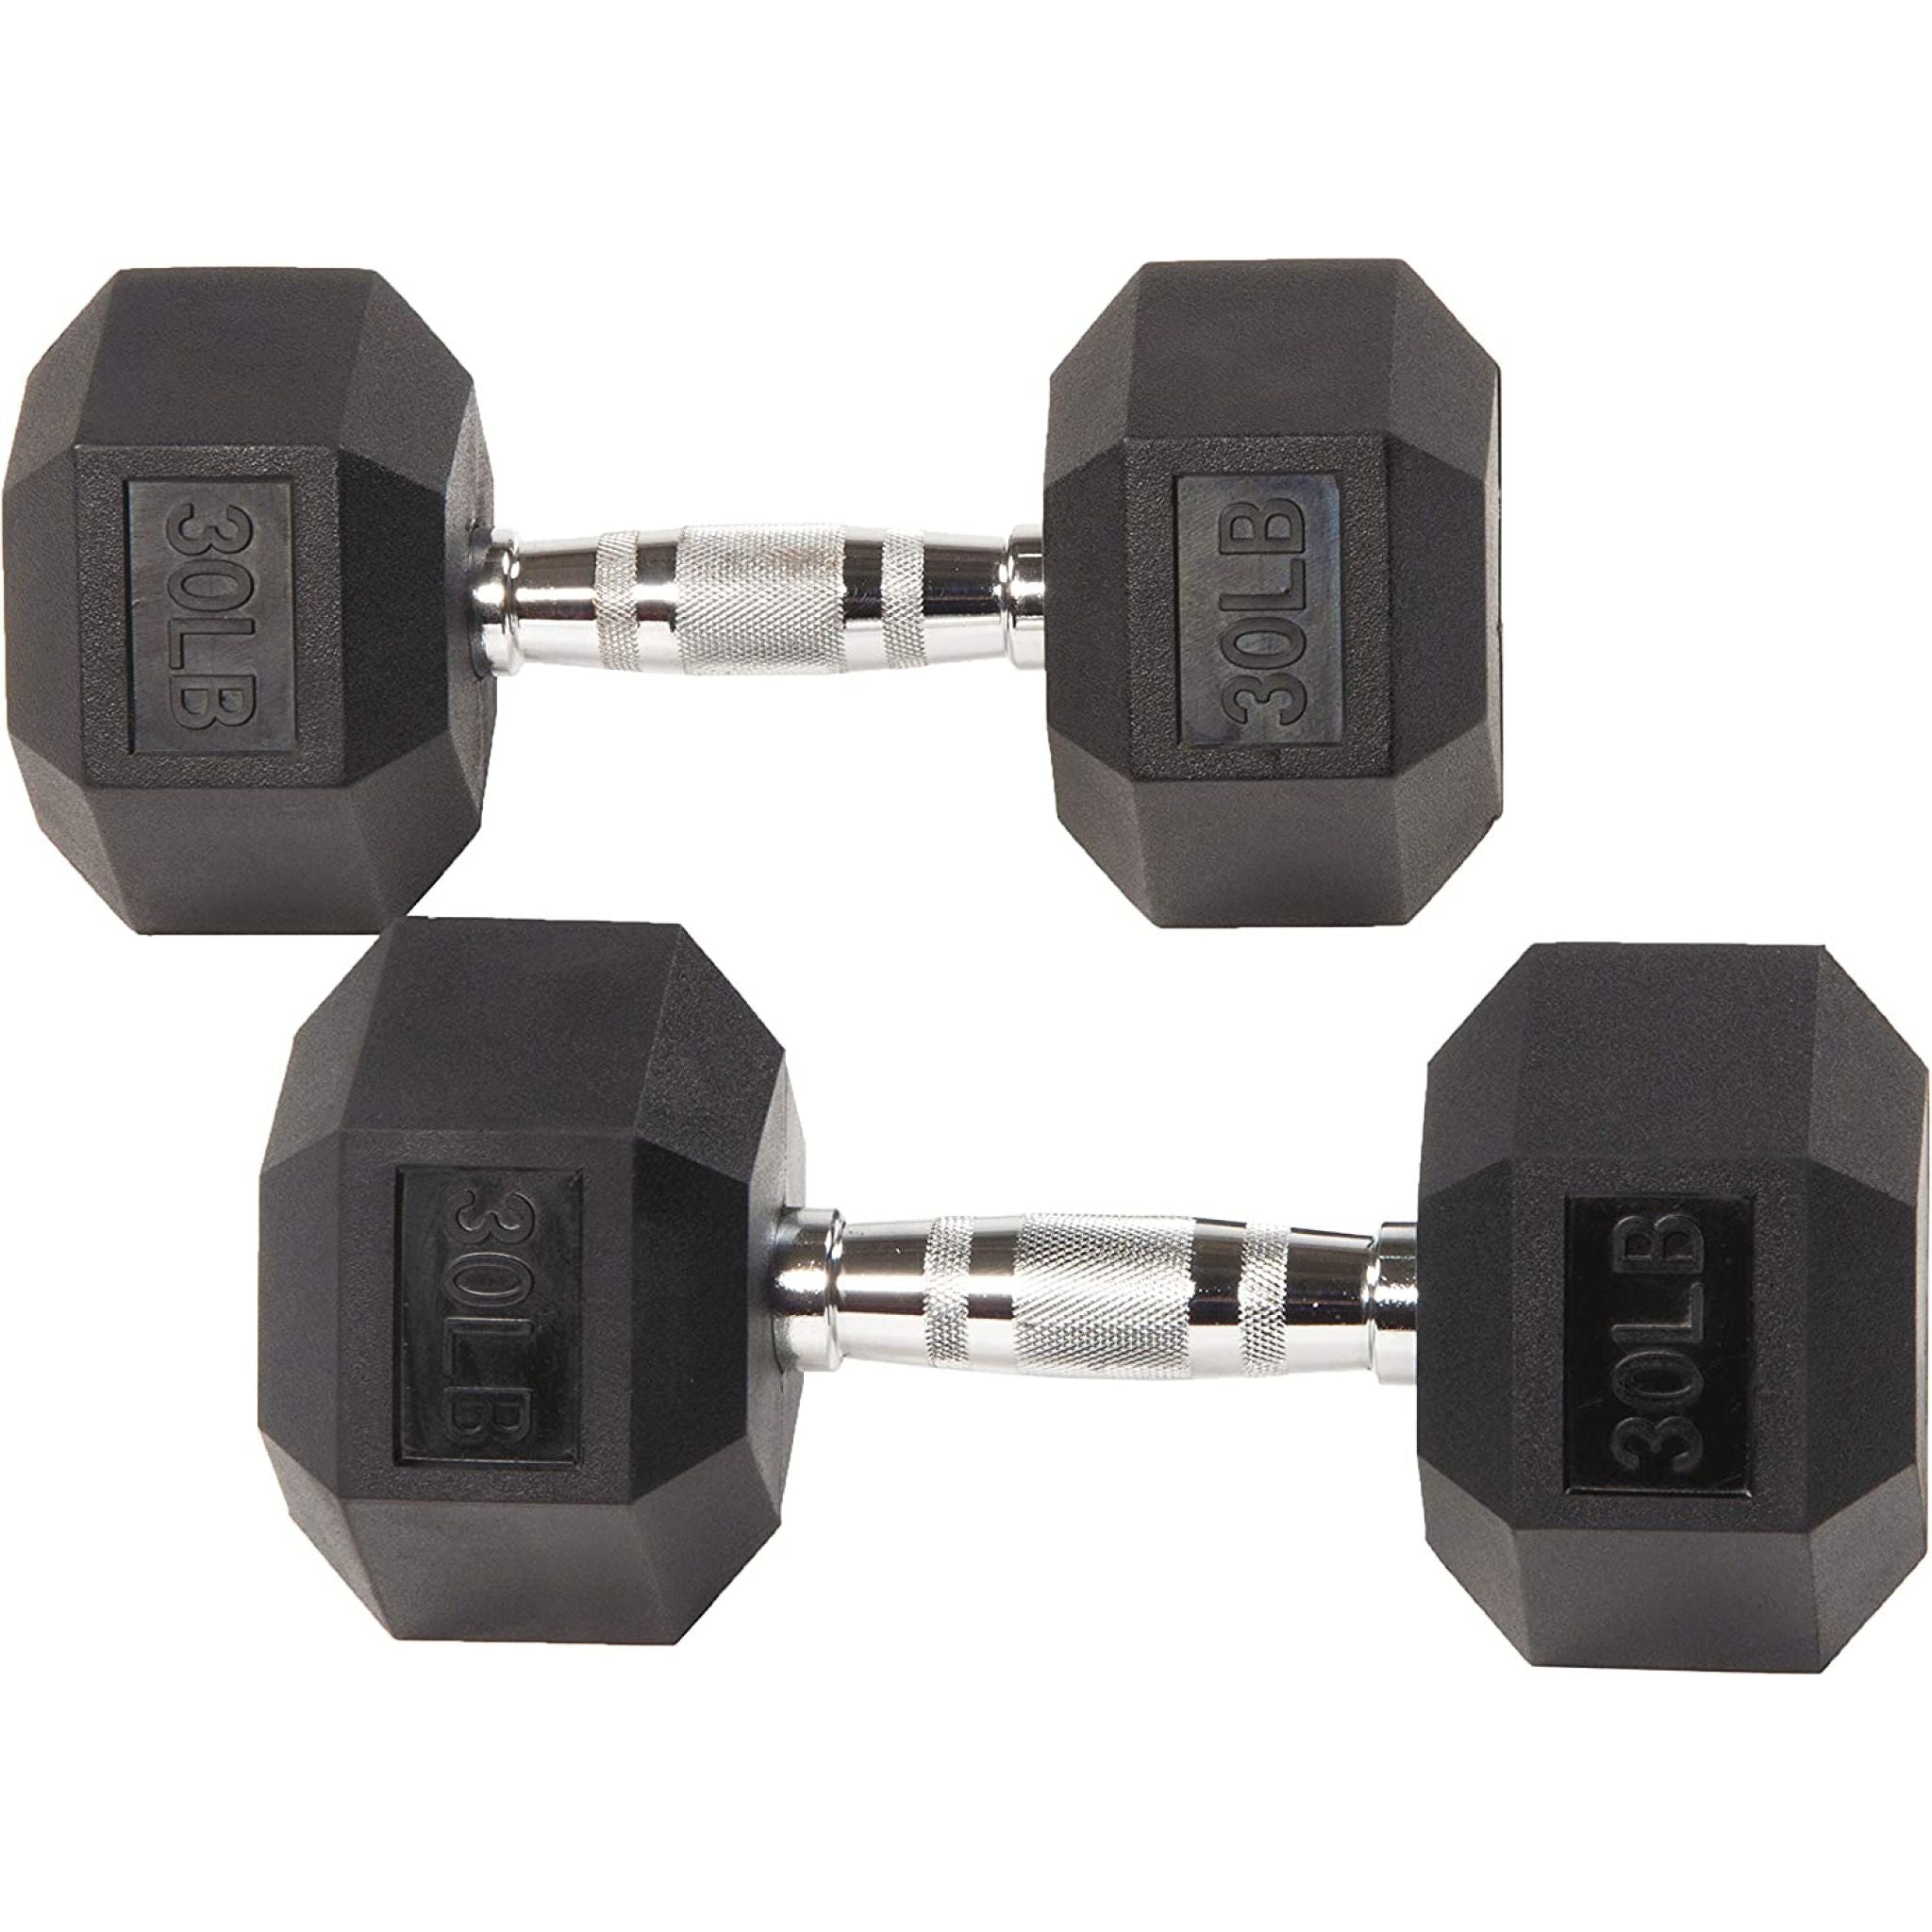 30Lb rubber hex dumbbells pair at Express Gym Supply